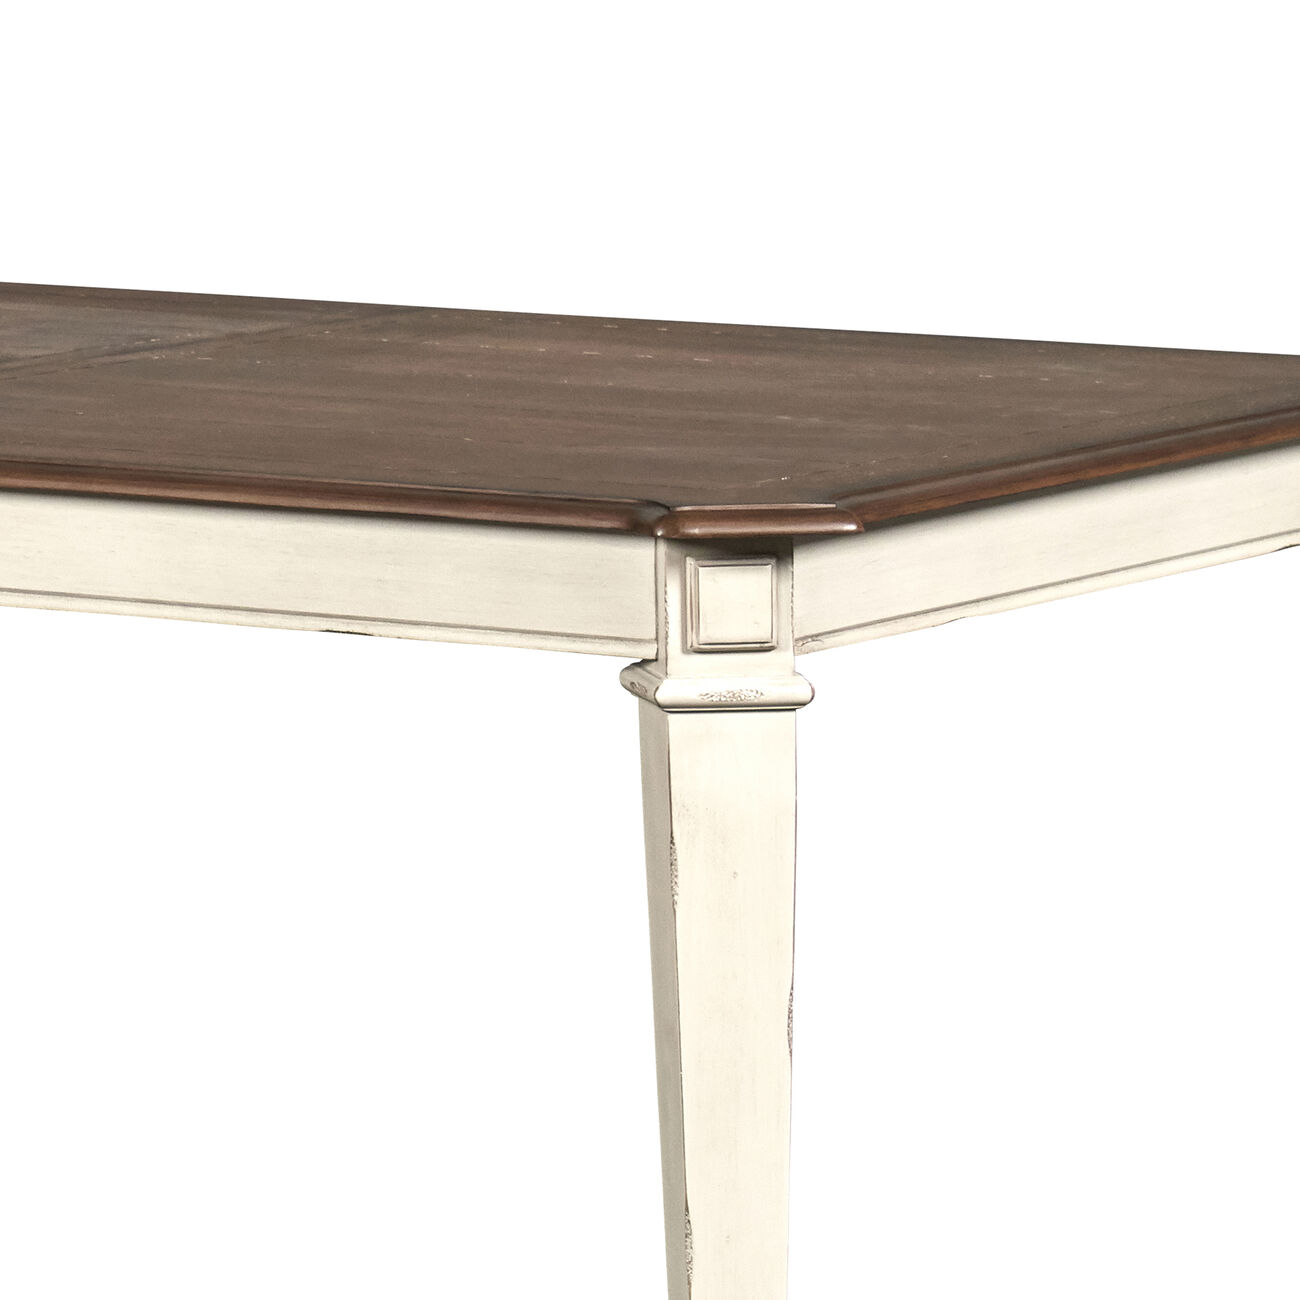 Plank Top Wooden Dining Table with Extendable Leaf, Antique white and Brown